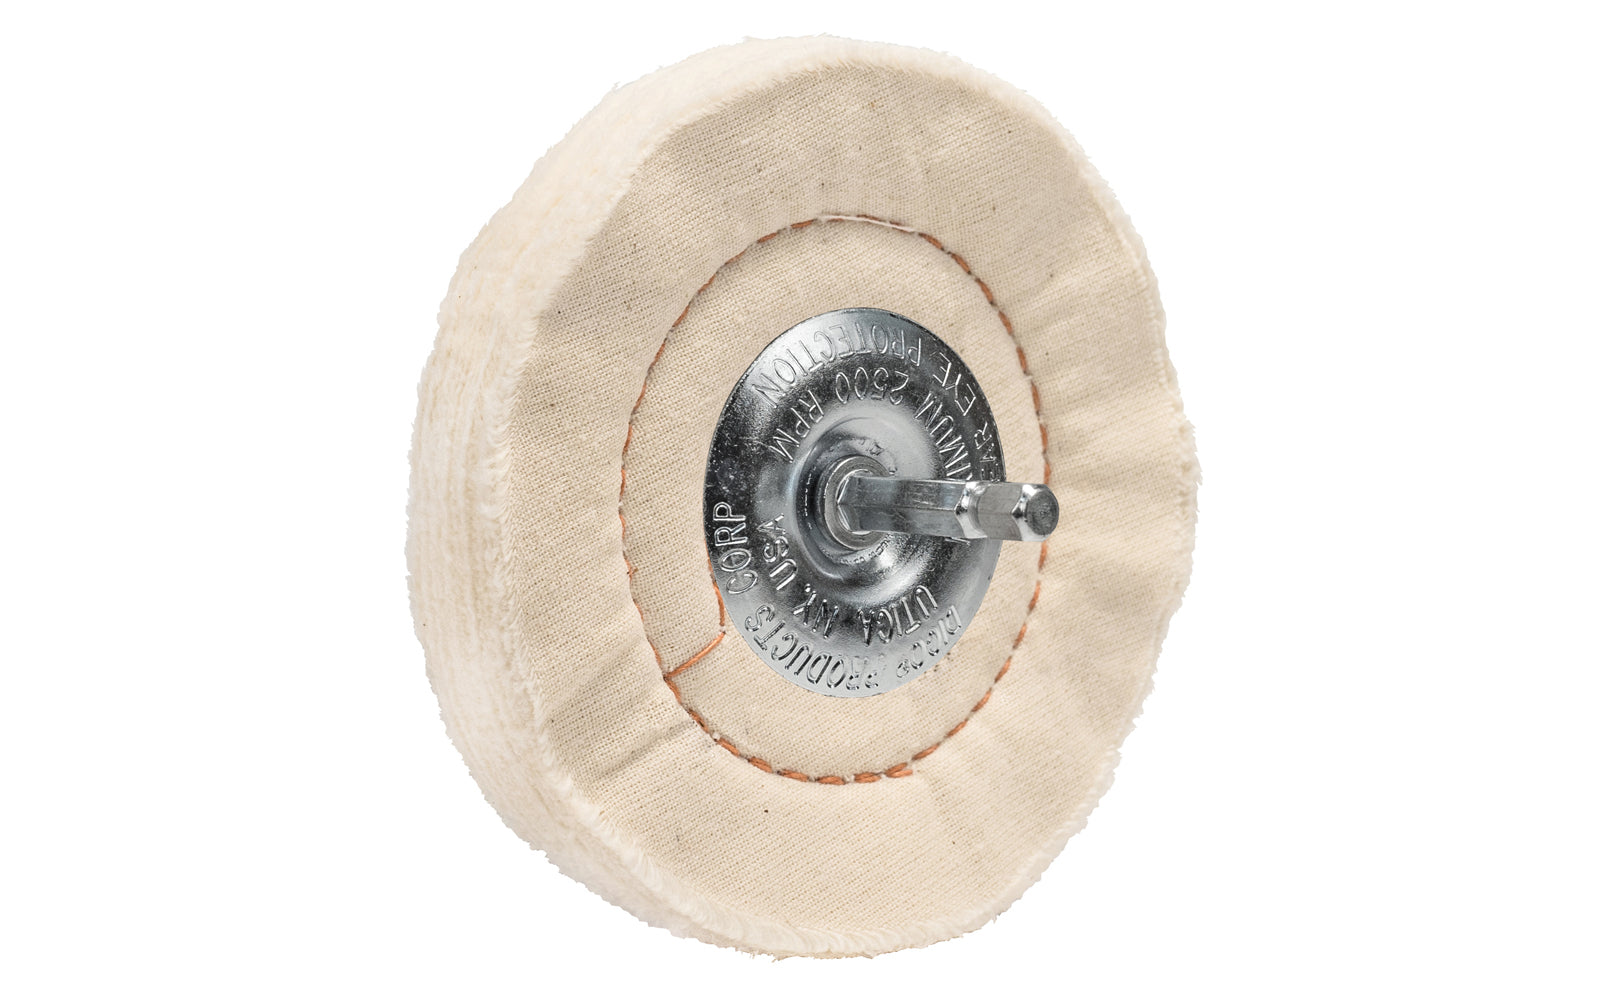 The 4" Cushion Sewn Buffing Wheel With 1/4" Mandrel ~ 1/2" Thick is ideal for light cutting & coloring (polishing). 4" diameter of wheel. Made in USA. Dico Polishing Company 527-41-4M